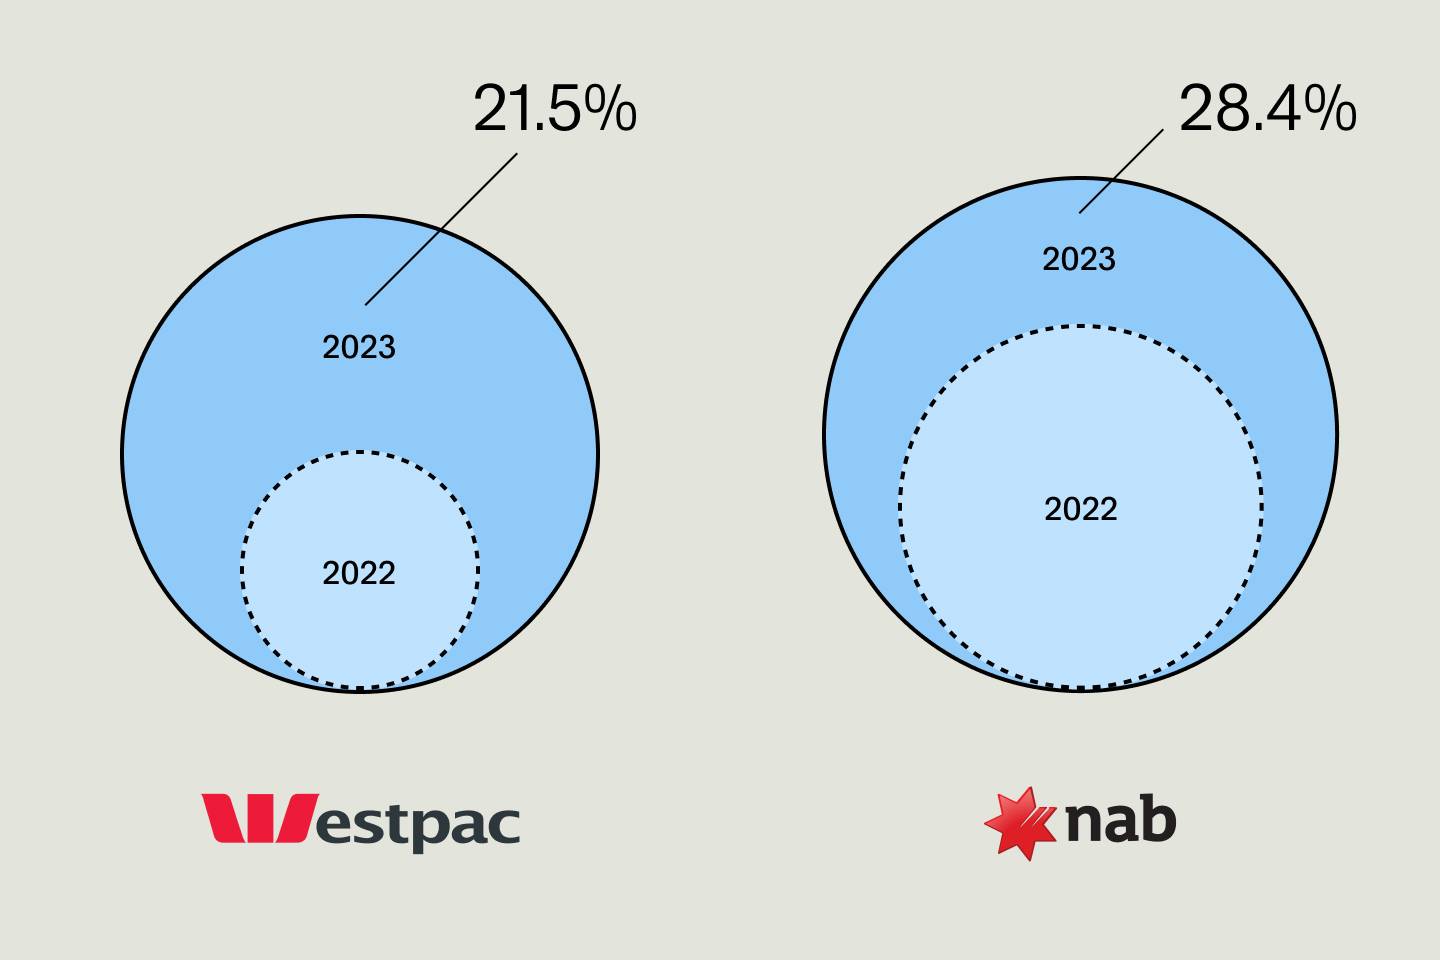 Graphs showing percentages of Westpac and NAB to support the climate shareholders who voted to support climate-focused resolutions